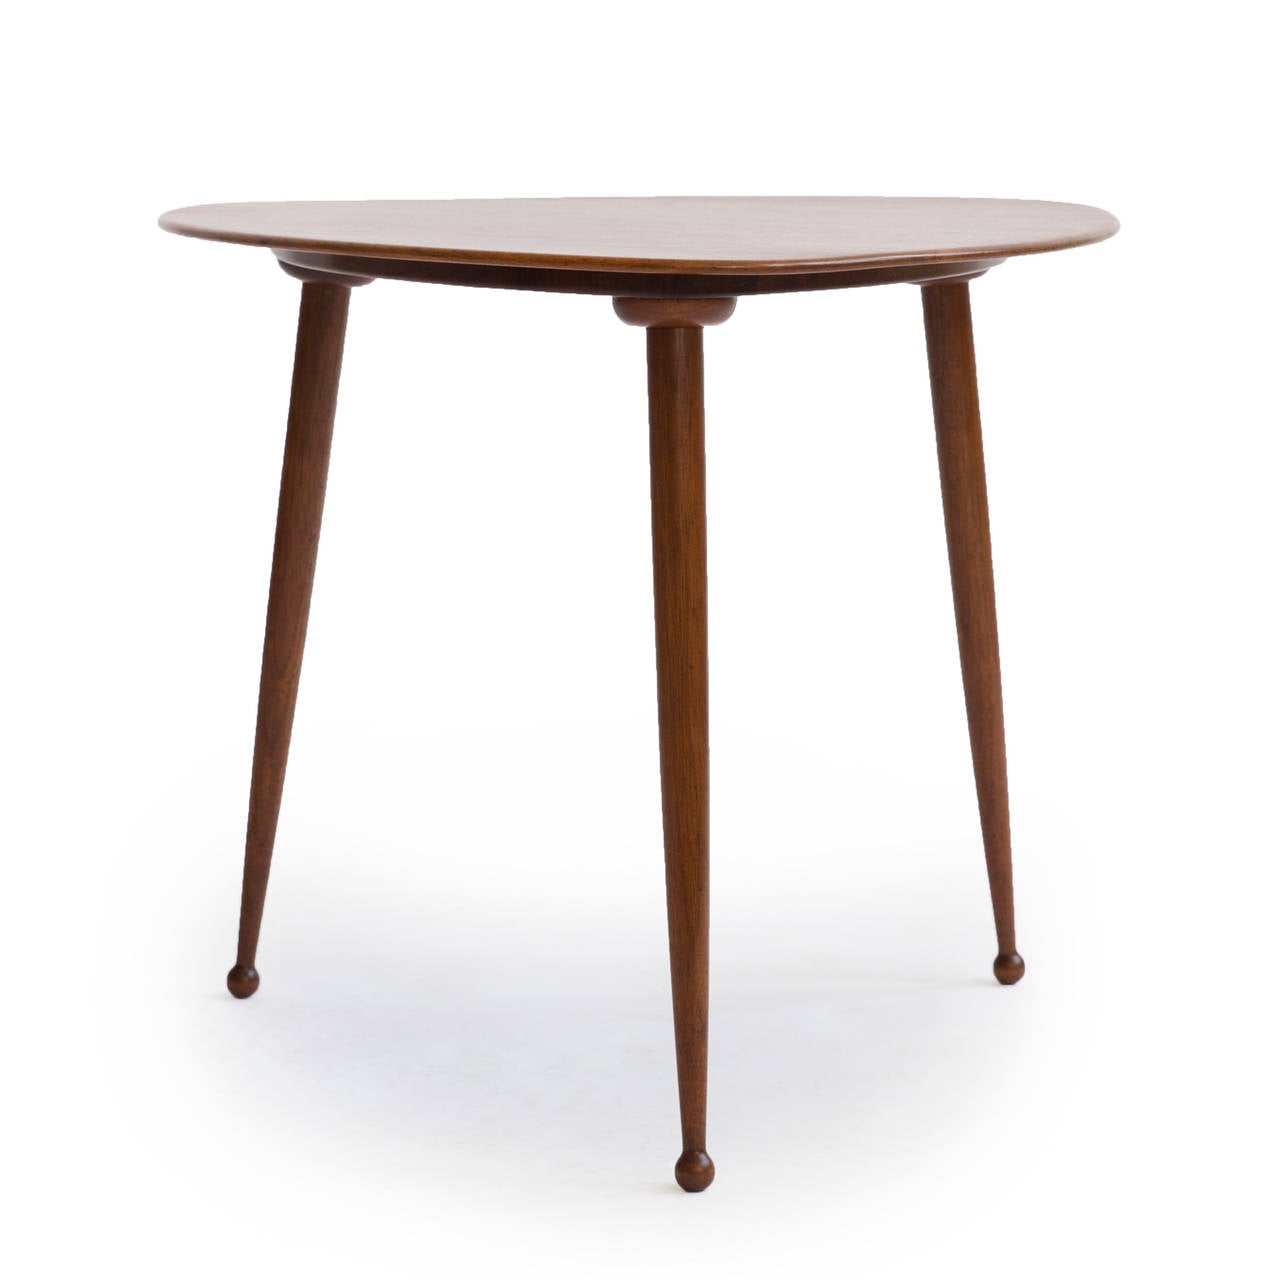 Beautiful small Peder Moos side table in walnut. 

Triangular top with rounded edges and monogram inlay, mounted on three drumstick legs. 

Designed and executed by Peder Moos 1952 with signature. 

Very fine original condition.